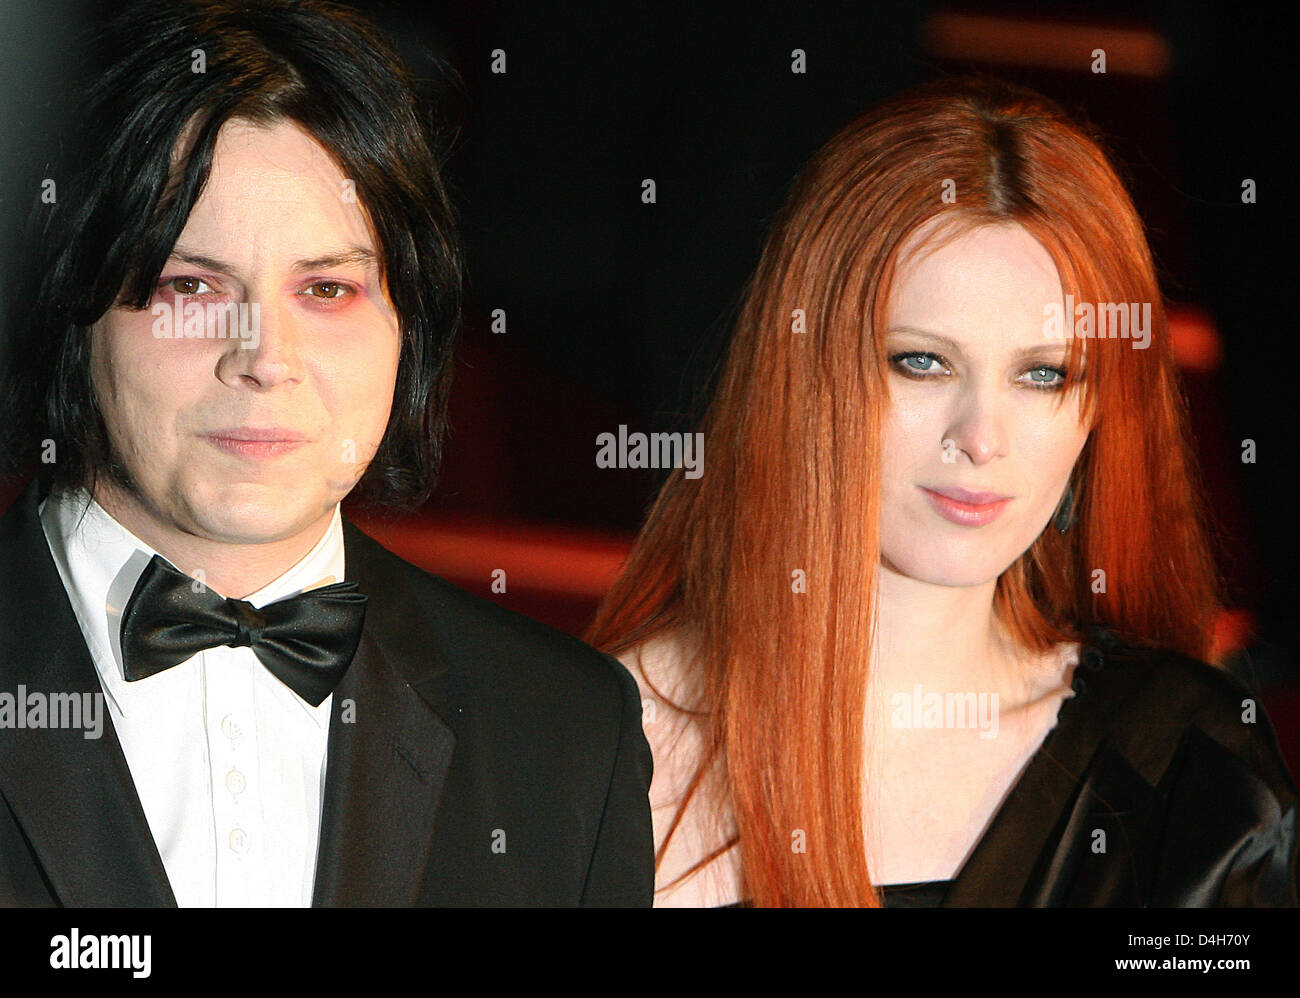 Singer Jack White and his wife Karen Elson arrive for the world premiere of the new James Bond film 'Quantum Of Solace' at Odeon Leicester Square in London, Great Britain, 29 October 2008. Photo: Patrick van Katwijk Stock Photo